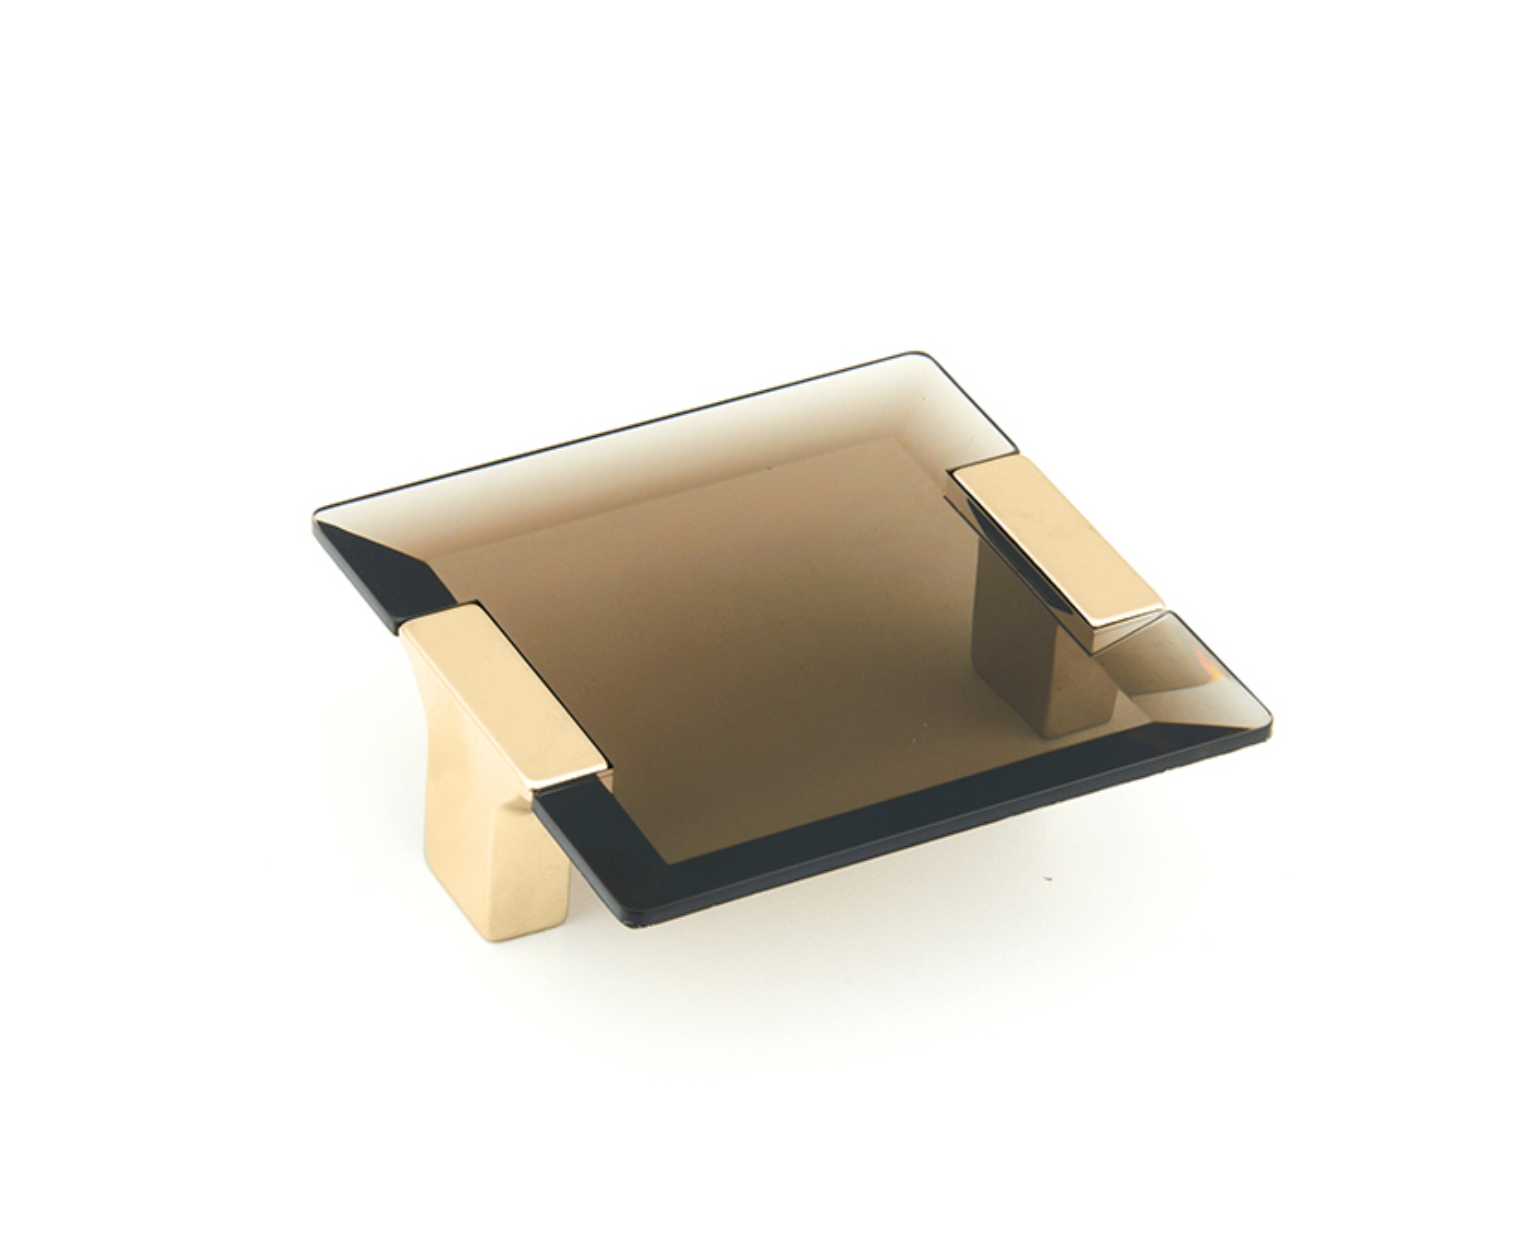 Satin Brass "Ponce" Smoked Glass Cabinet Knob and Drawer Pulls